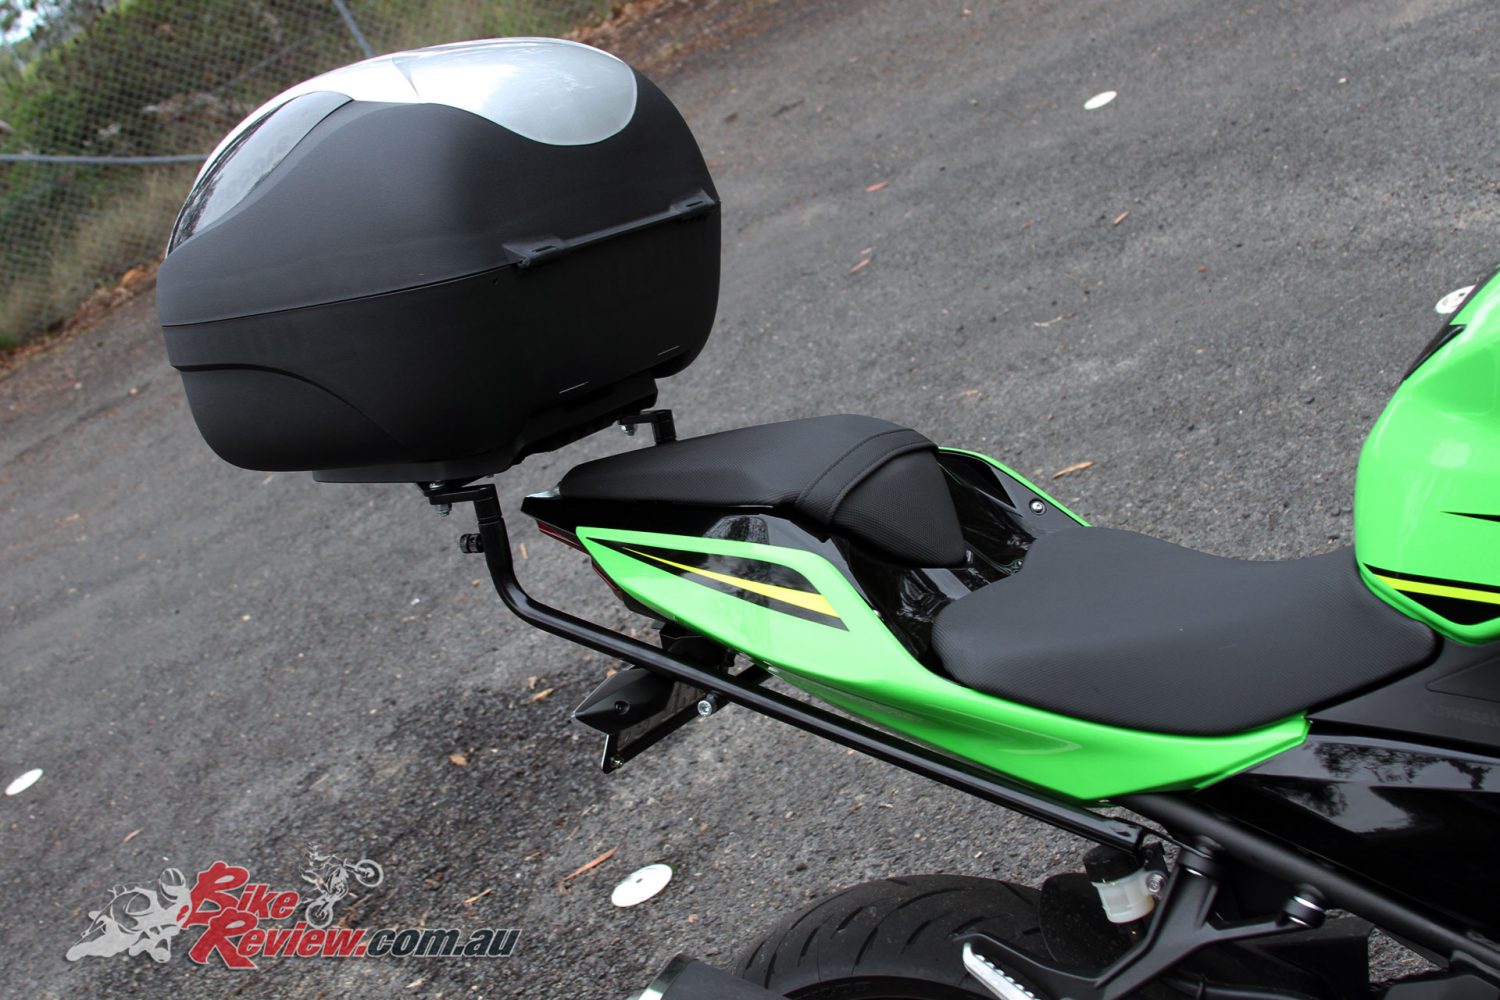 We fit a Ventura rack, Coocase 36L Wizard topbox and Oggy Fender Eliminator to our Long Term Ninja 400